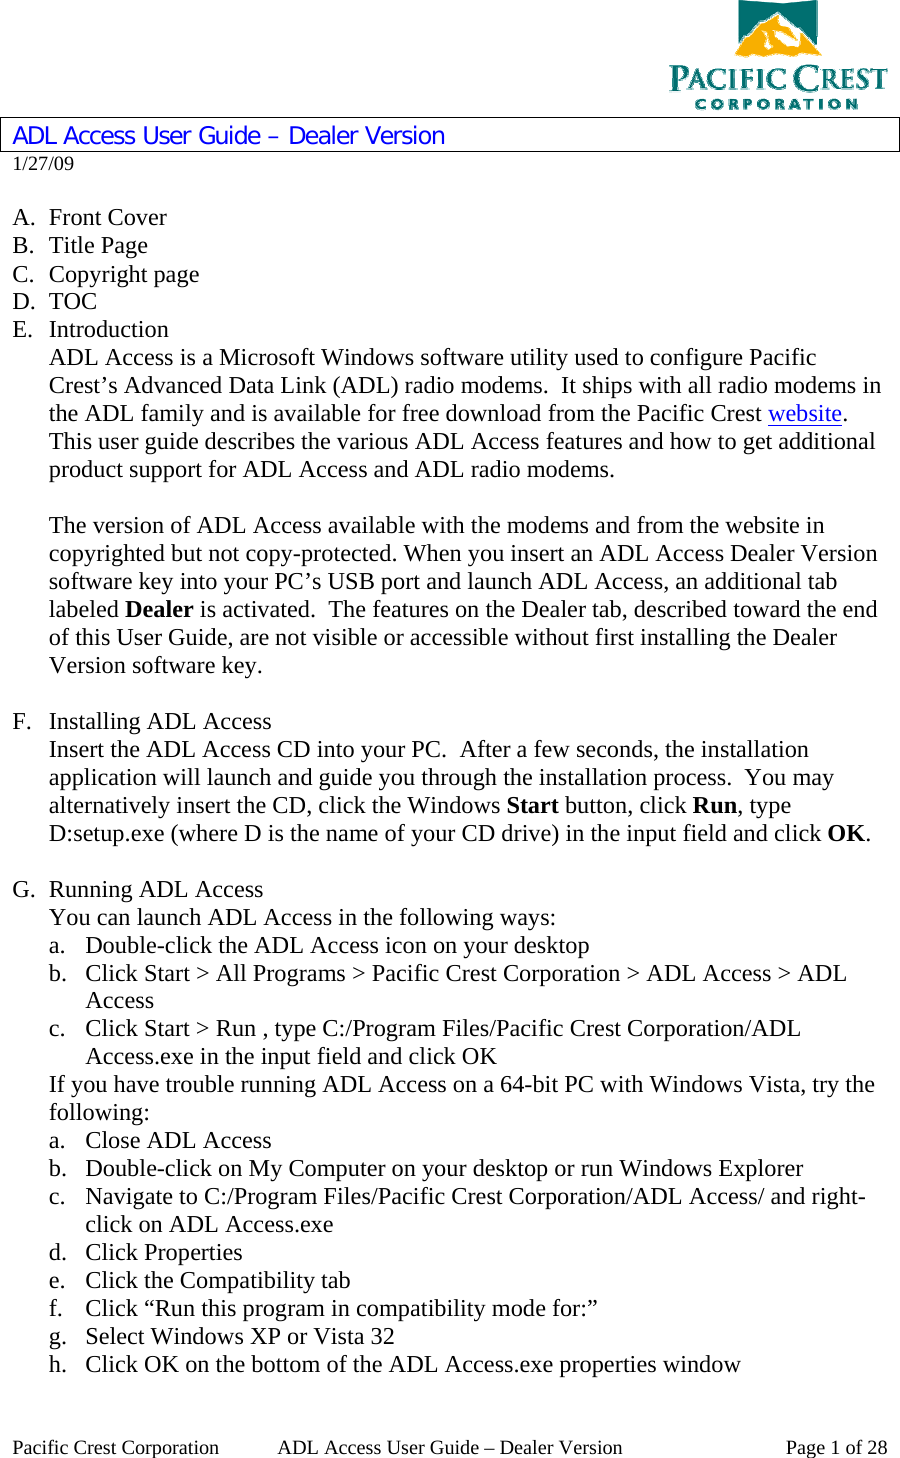  Pacific Crest Corporation  ADL Access User Guide – Dealer Version  Page 1 of 28 ADL Access User Guide – Dealer Version 1/27/09  A. Front Cover B. Title Page C. Copyright page D. TOC E. Introduction ADL Access is a Microsoft Windows software utility used to configure Pacific Crest’s Advanced Data Link (ADL) radio modems.  It ships with all radio modems in the ADL family and is available for free download from the Pacific Crest website.  This user guide describes the various ADL Access features and how to get additional product support for ADL Access and ADL radio modems.  The version of ADL Access available with the modems and from the website in copyrighted but not copy-protected. When you insert an ADL Access Dealer Version software key into your PC’s USB port and launch ADL Access, an additional tab labeled Dealer is activated.  The features on the Dealer tab, described toward the end of this User Guide, are not visible or accessible without first installing the Dealer Version software key.  F. Installing ADL Access Insert the ADL Access CD into your PC.  After a few seconds, the installation application will launch and guide you through the installation process.  You may alternatively insert the CD, click the Windows Start button, click Run, type D:setup.exe (where D is the name of your CD drive) in the input field and click OK.  G. Running ADL Access You can launch ADL Access in the following ways: a. Double-click the ADL Access icon on your desktop b. Click Start &gt; All Programs &gt; Pacific Crest Corporation &gt; ADL Access &gt; ADL Access c. Click Start &gt; Run , type C:/Program Files/Pacific Crest Corporation/ADL Access.exe in the input field and click OK If you have trouble running ADL Access on a 64-bit PC with Windows Vista, try the following: a. Close ADL Access b. Double-click on My Computer on your desktop or run Windows Explorer c. Navigate to C:/Program Files/Pacific Crest Corporation/ADL Access/ and right-click on ADL Access.exe d. Click Properties e. Click the Compatibility tab f. Click “Run this program in compatibility mode for:” g. Select Windows XP or Vista 32 h. Click OK on the bottom of the ADL Access.exe properties window 